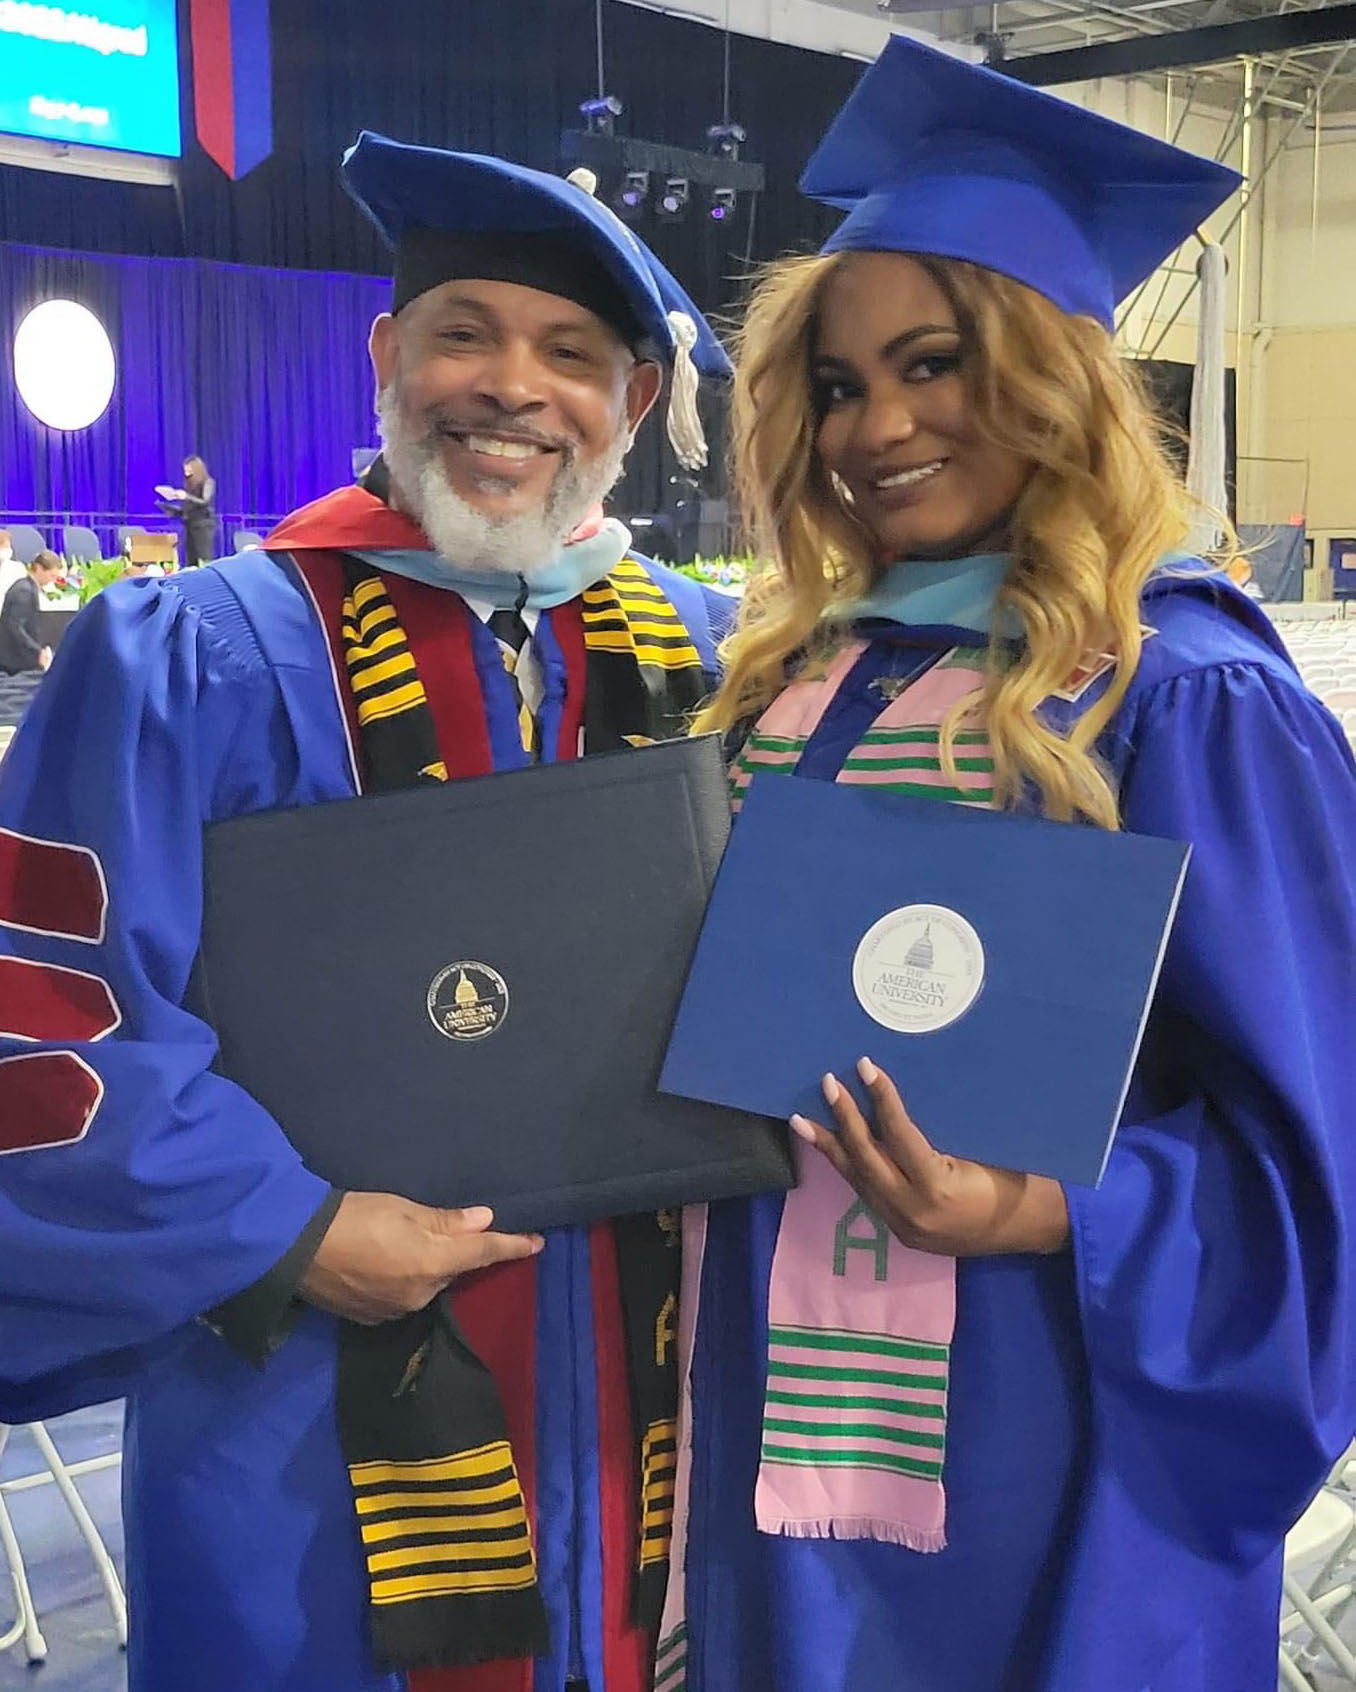 Jacques Patterson and his daughter Jacquelyn Patterson, on the day she earned a master of education degree and he received his doctorate.